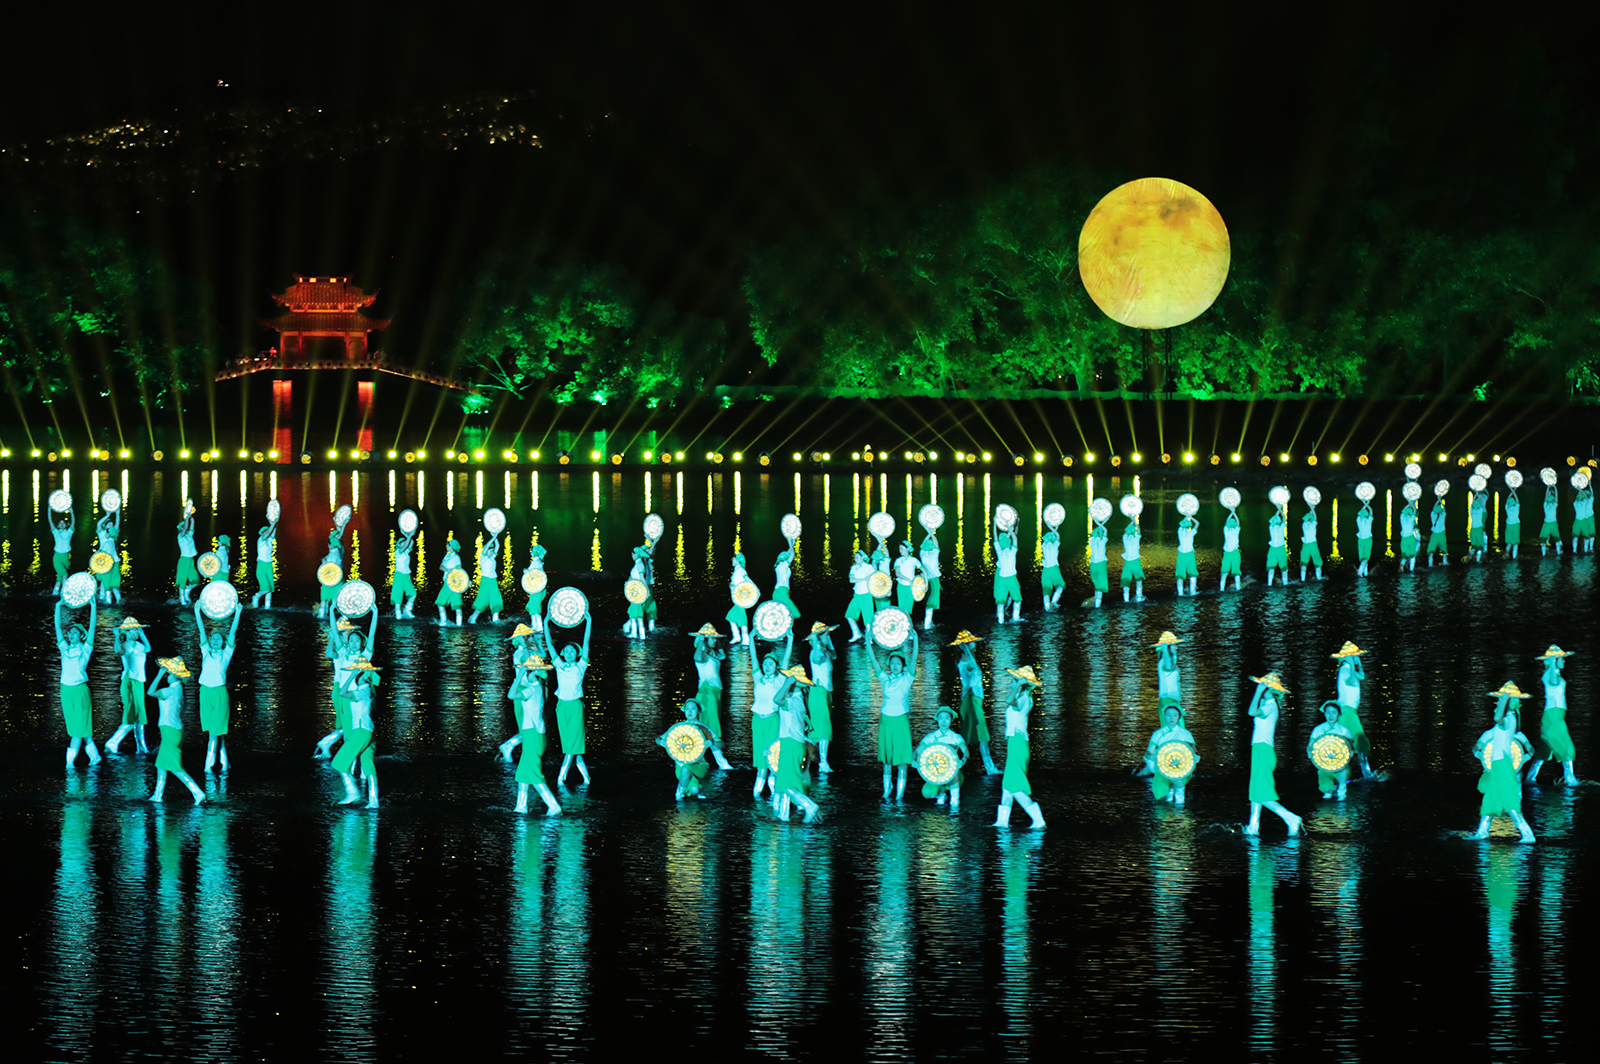 A dance depicting tea-picking is staged on the West Lake in Hangzhou, Zhejiang Province during the 